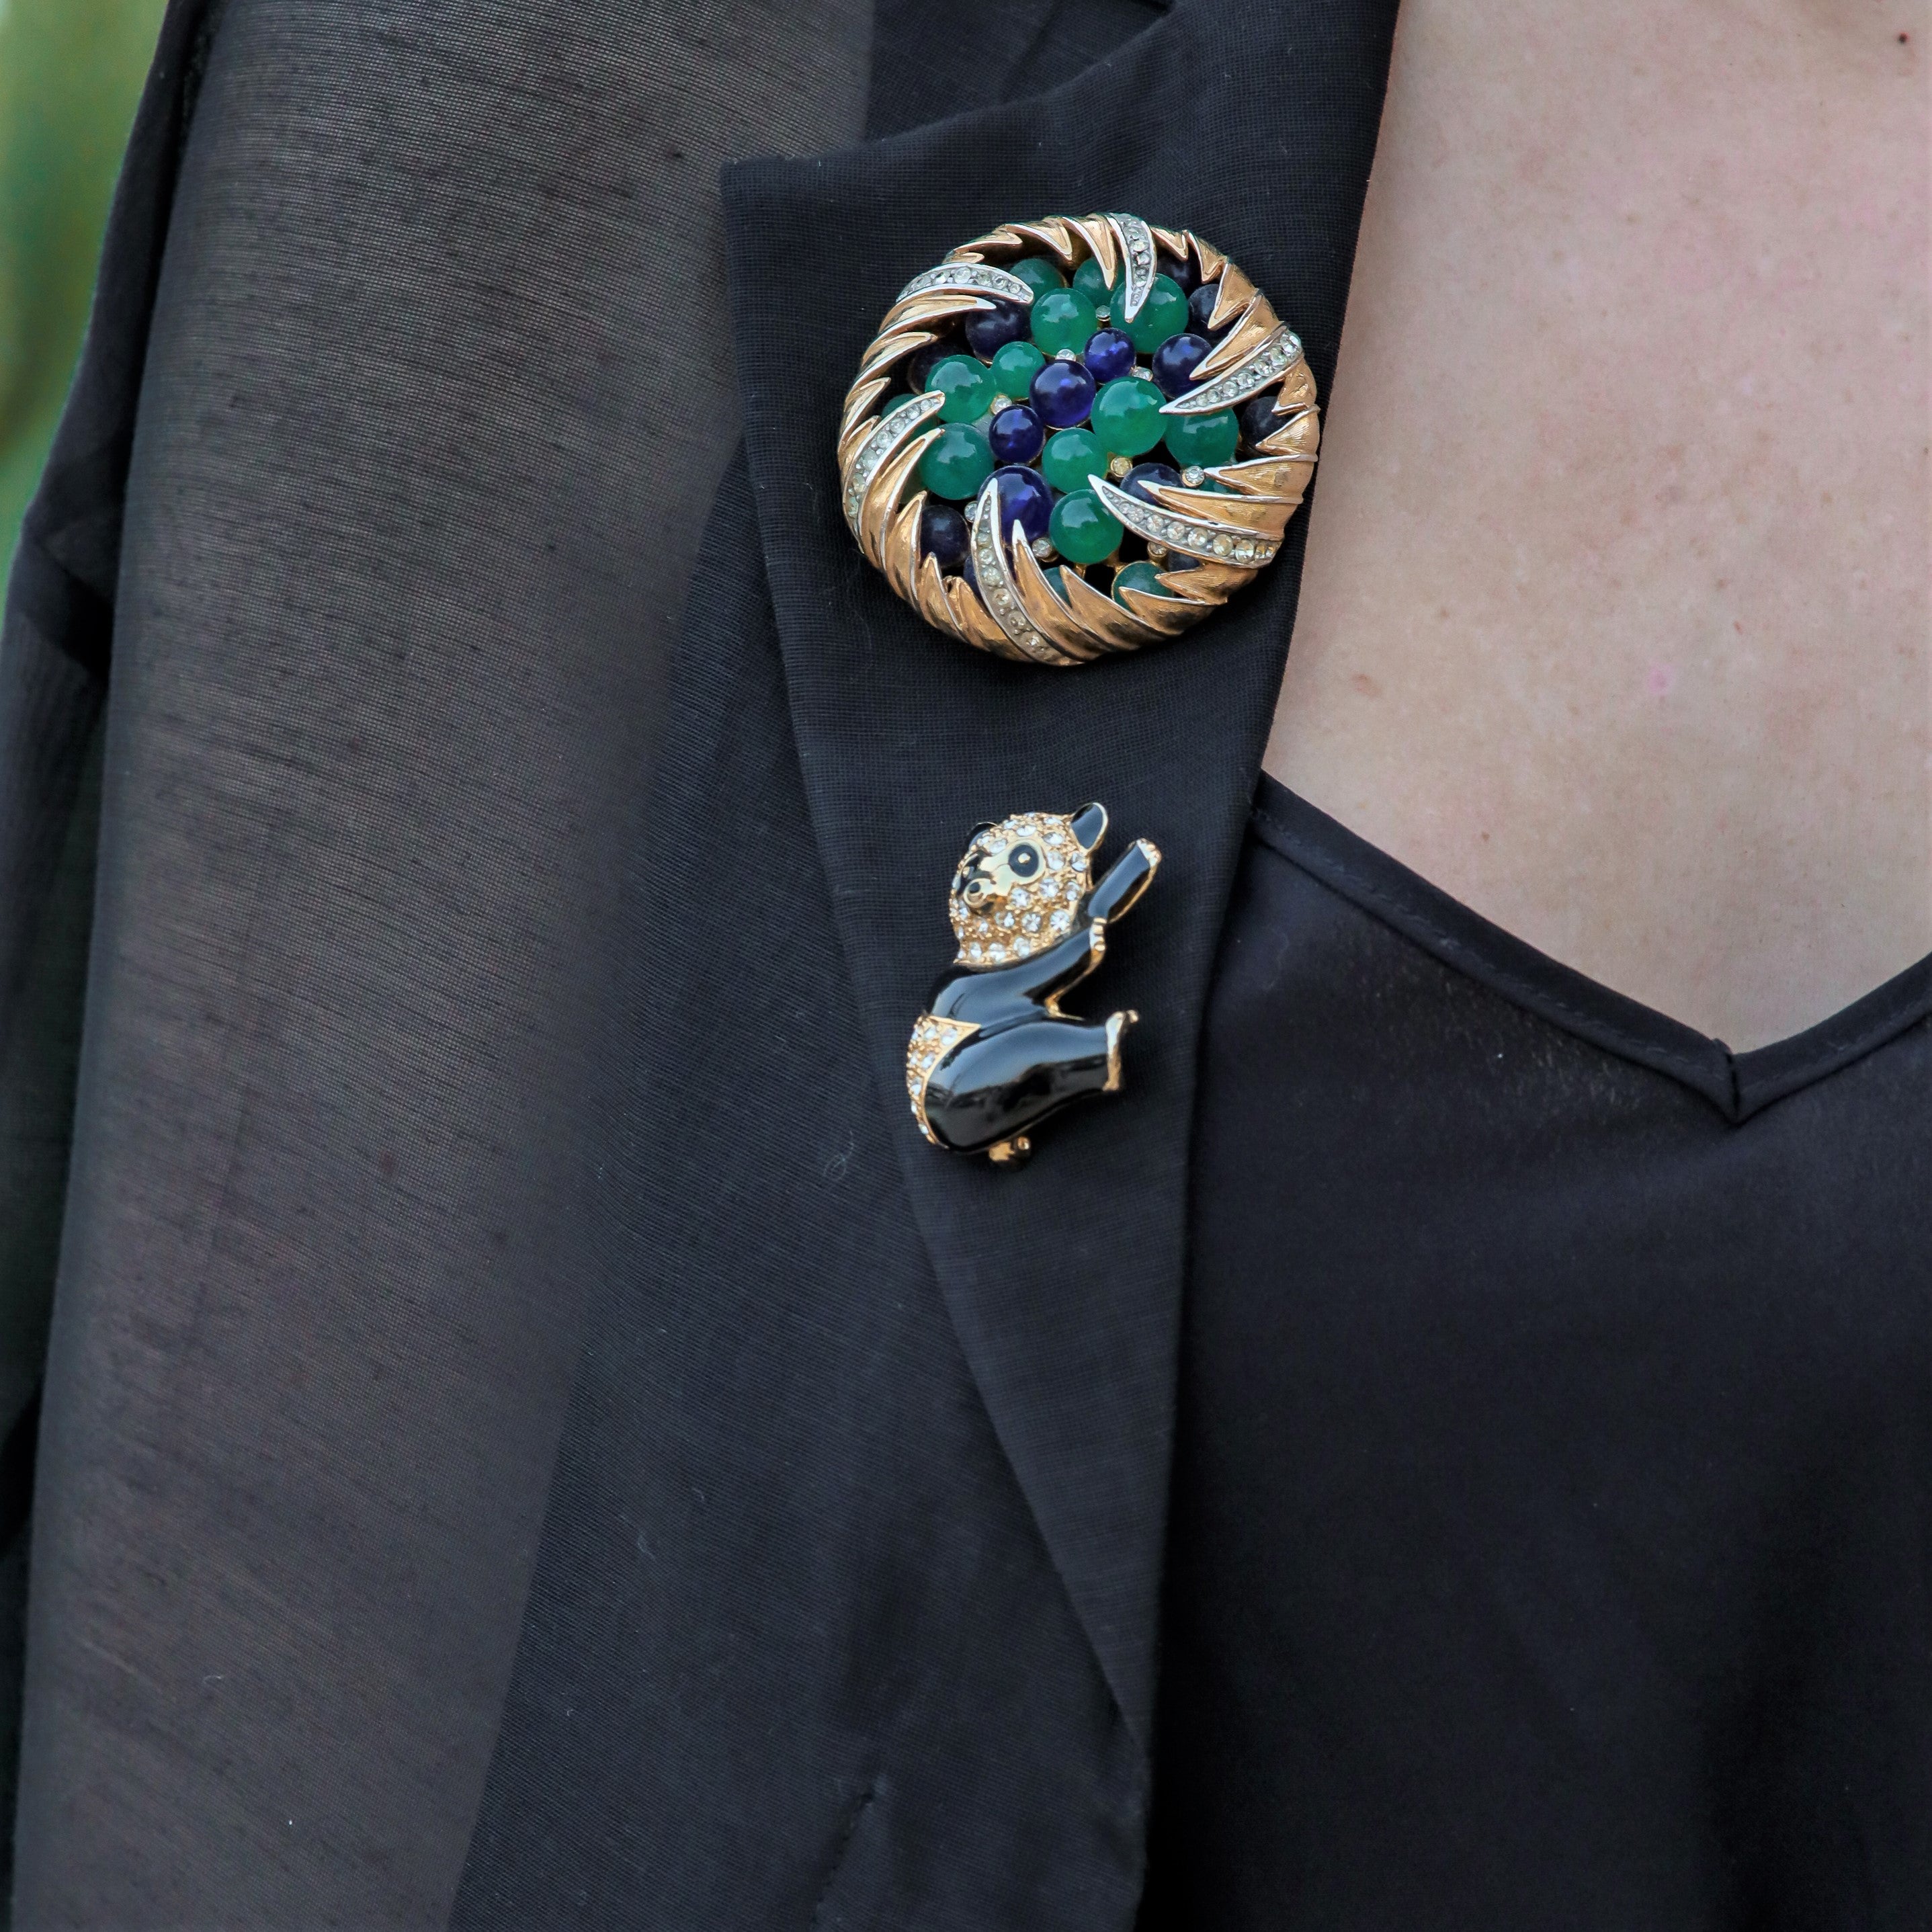 Contemporary panda pin brooch worn with a round brooch on a blazer lapel